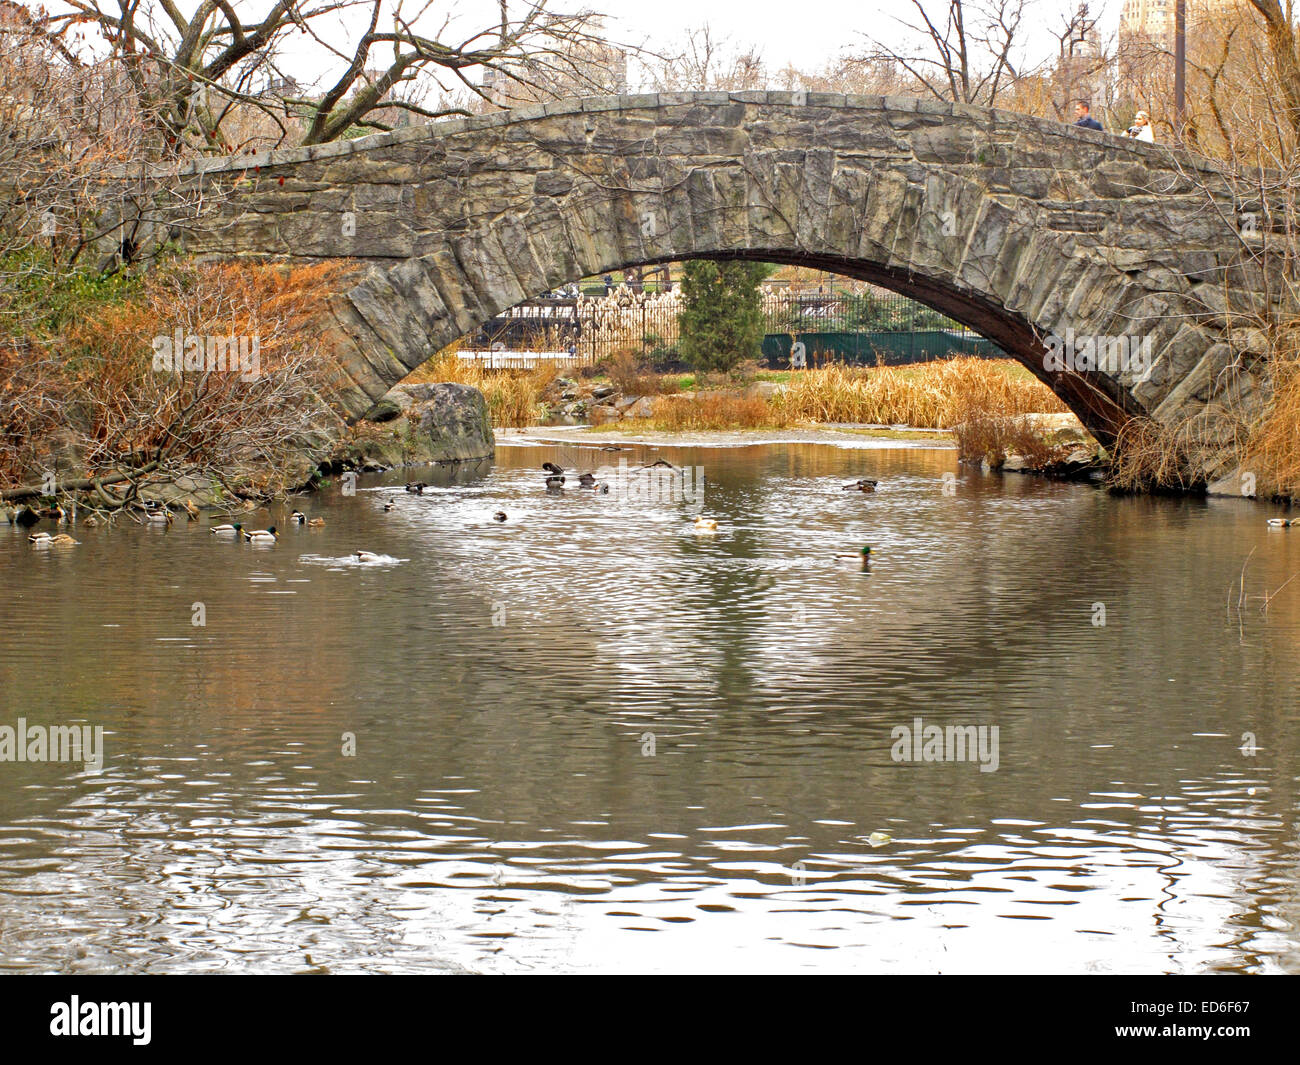 An old stone Bridge in Central Park, New York City Stock Photo